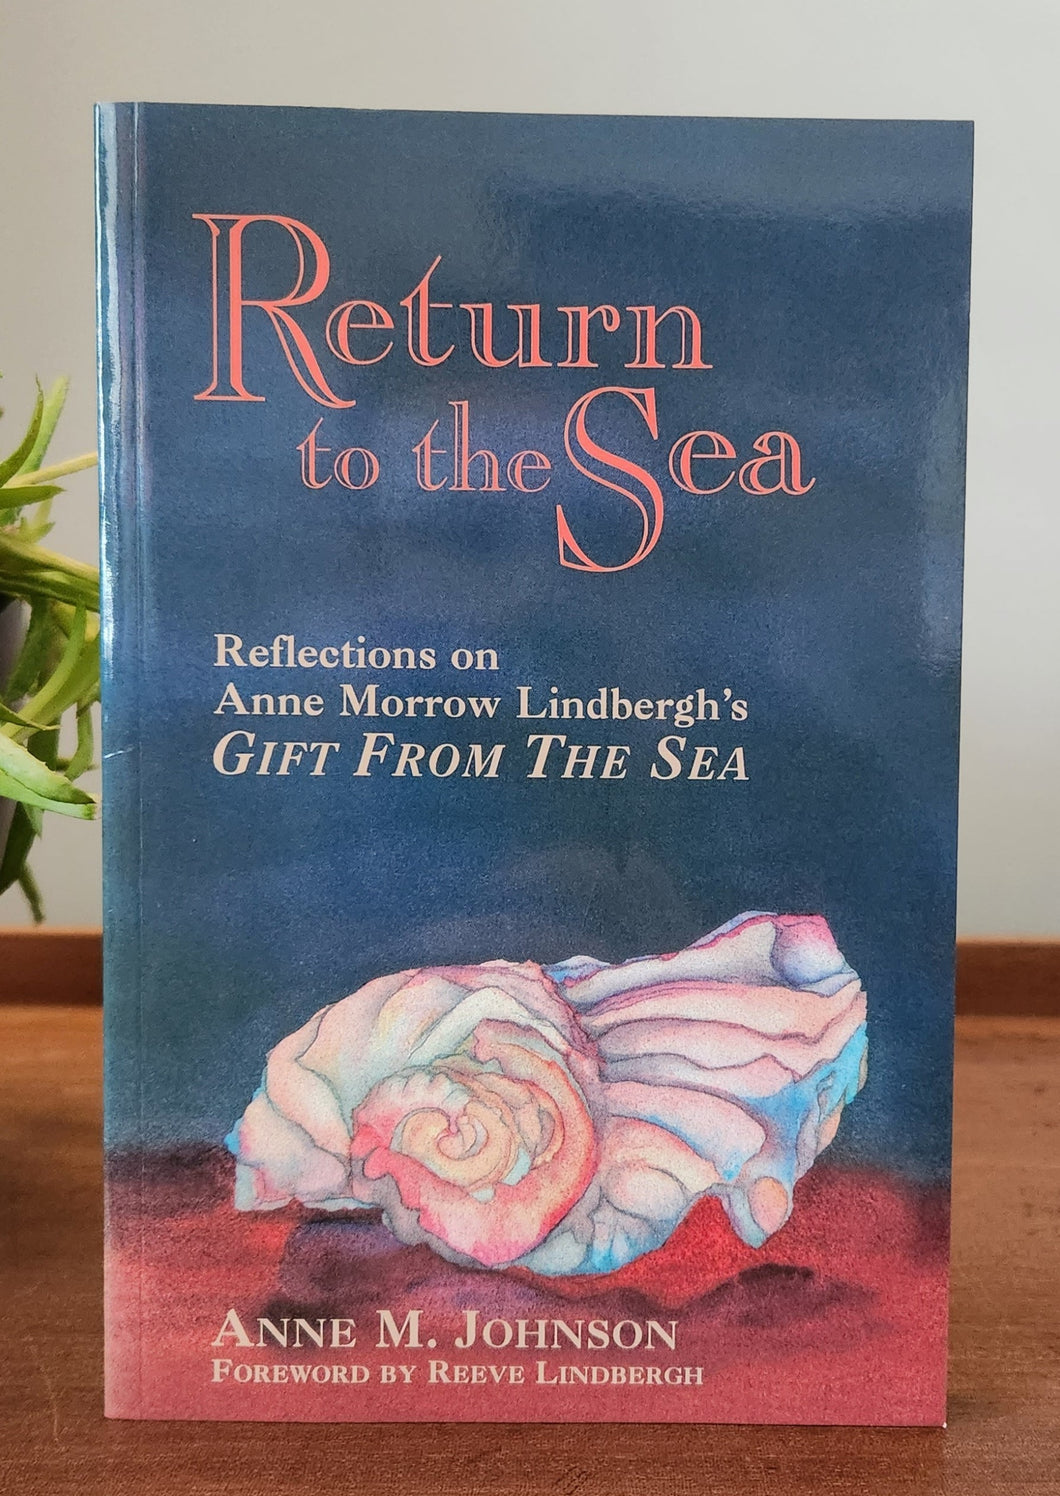 Return to the Sea by Anne M. Johnson